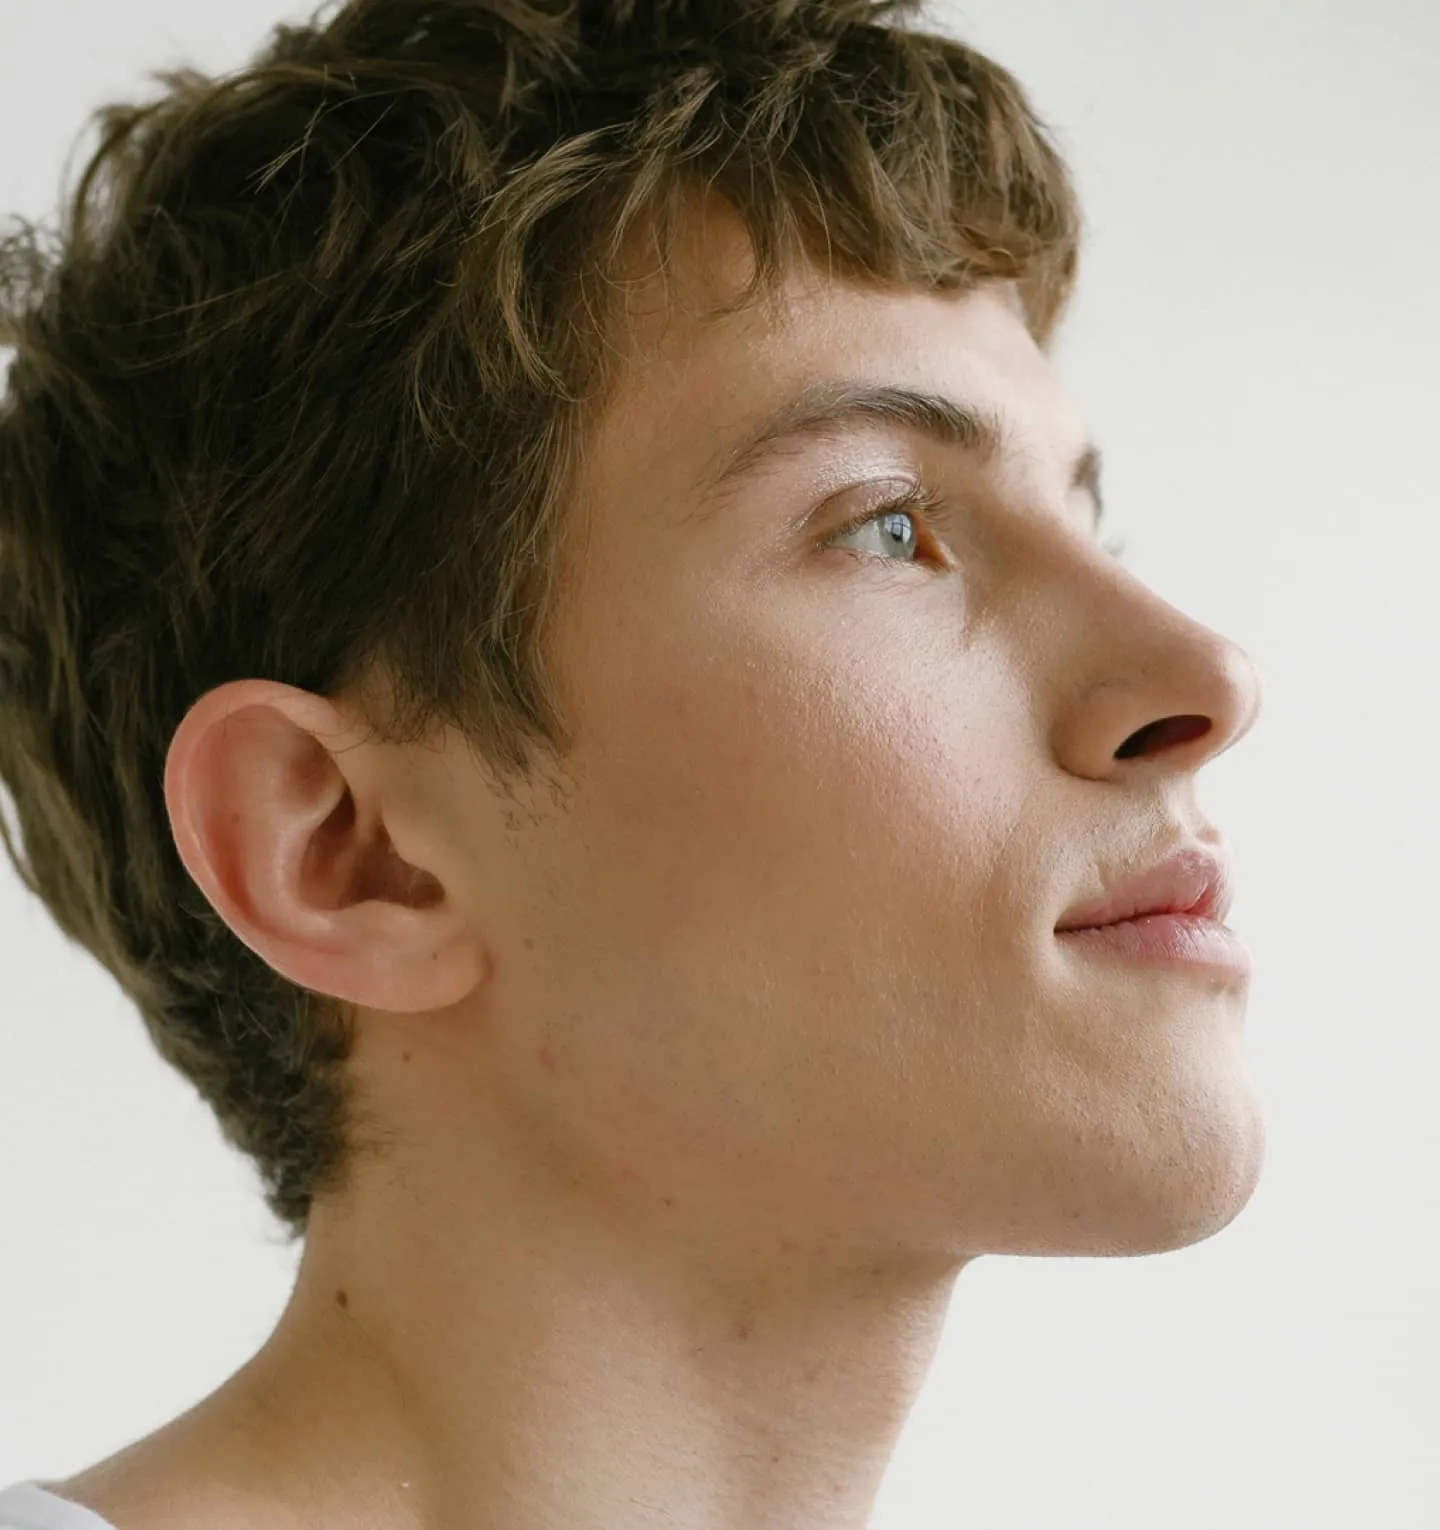 photo of a young man in profile